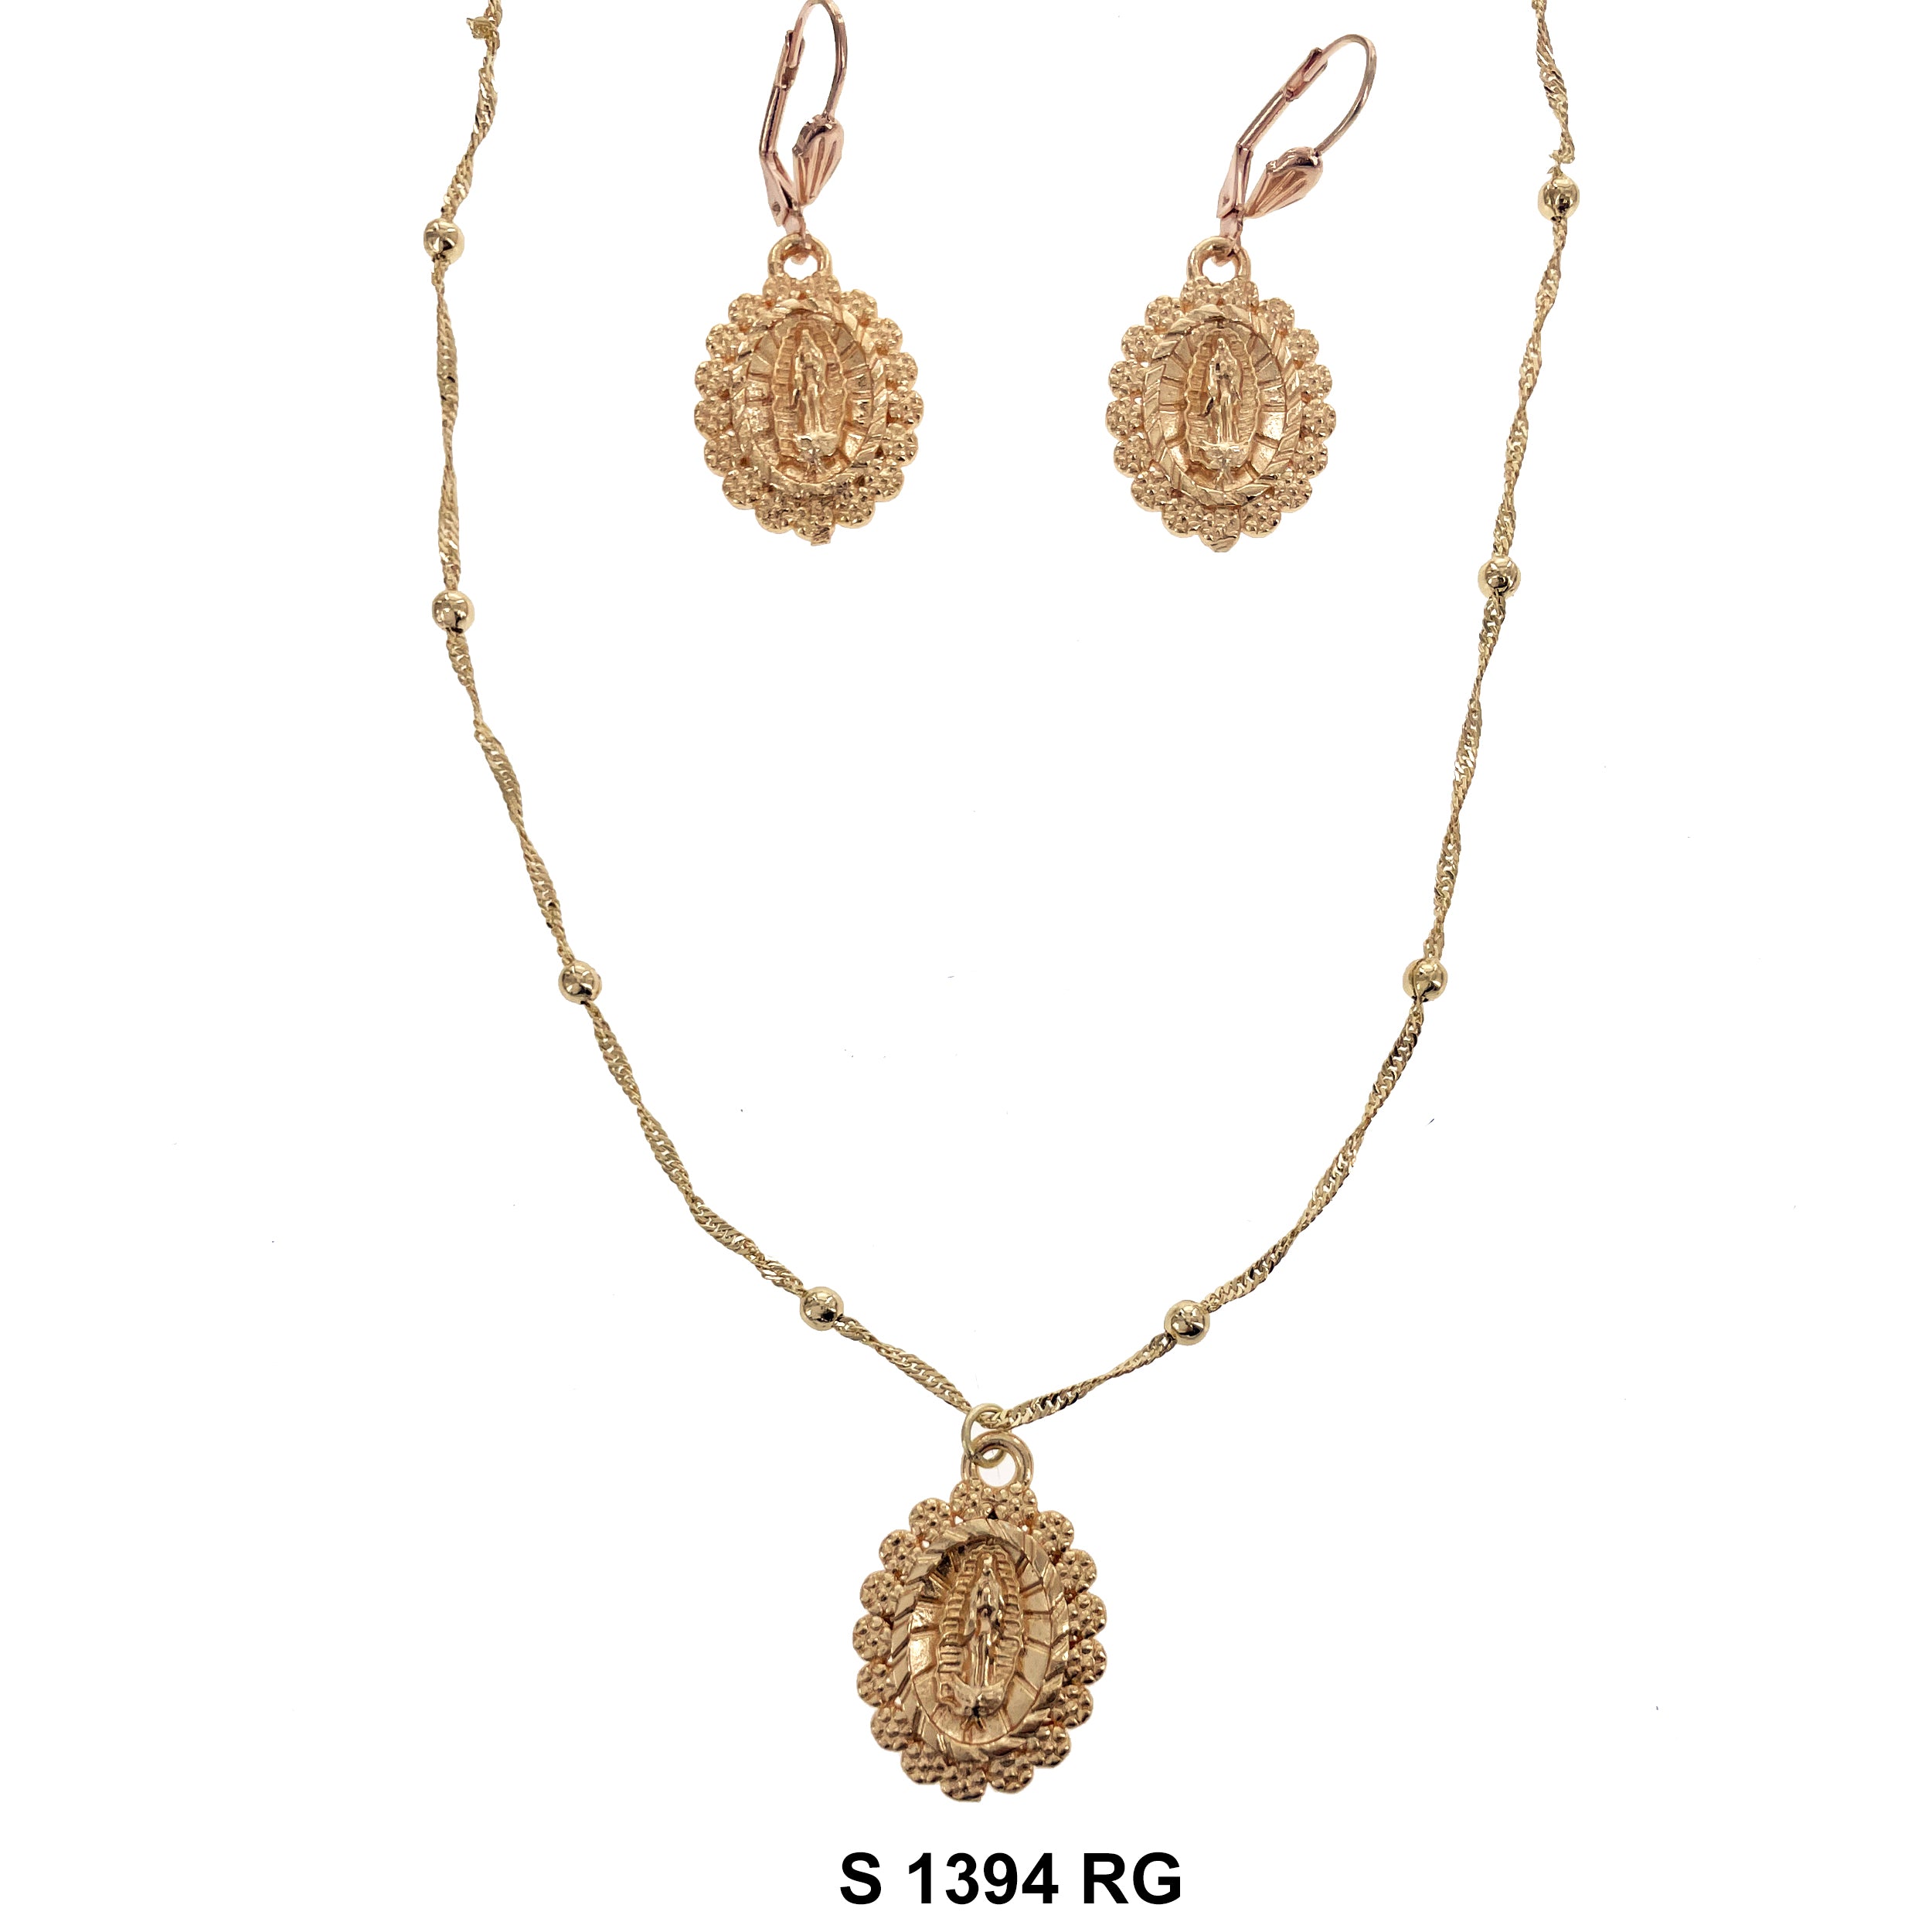 Guadalupe Necklace Set S 1394 RG